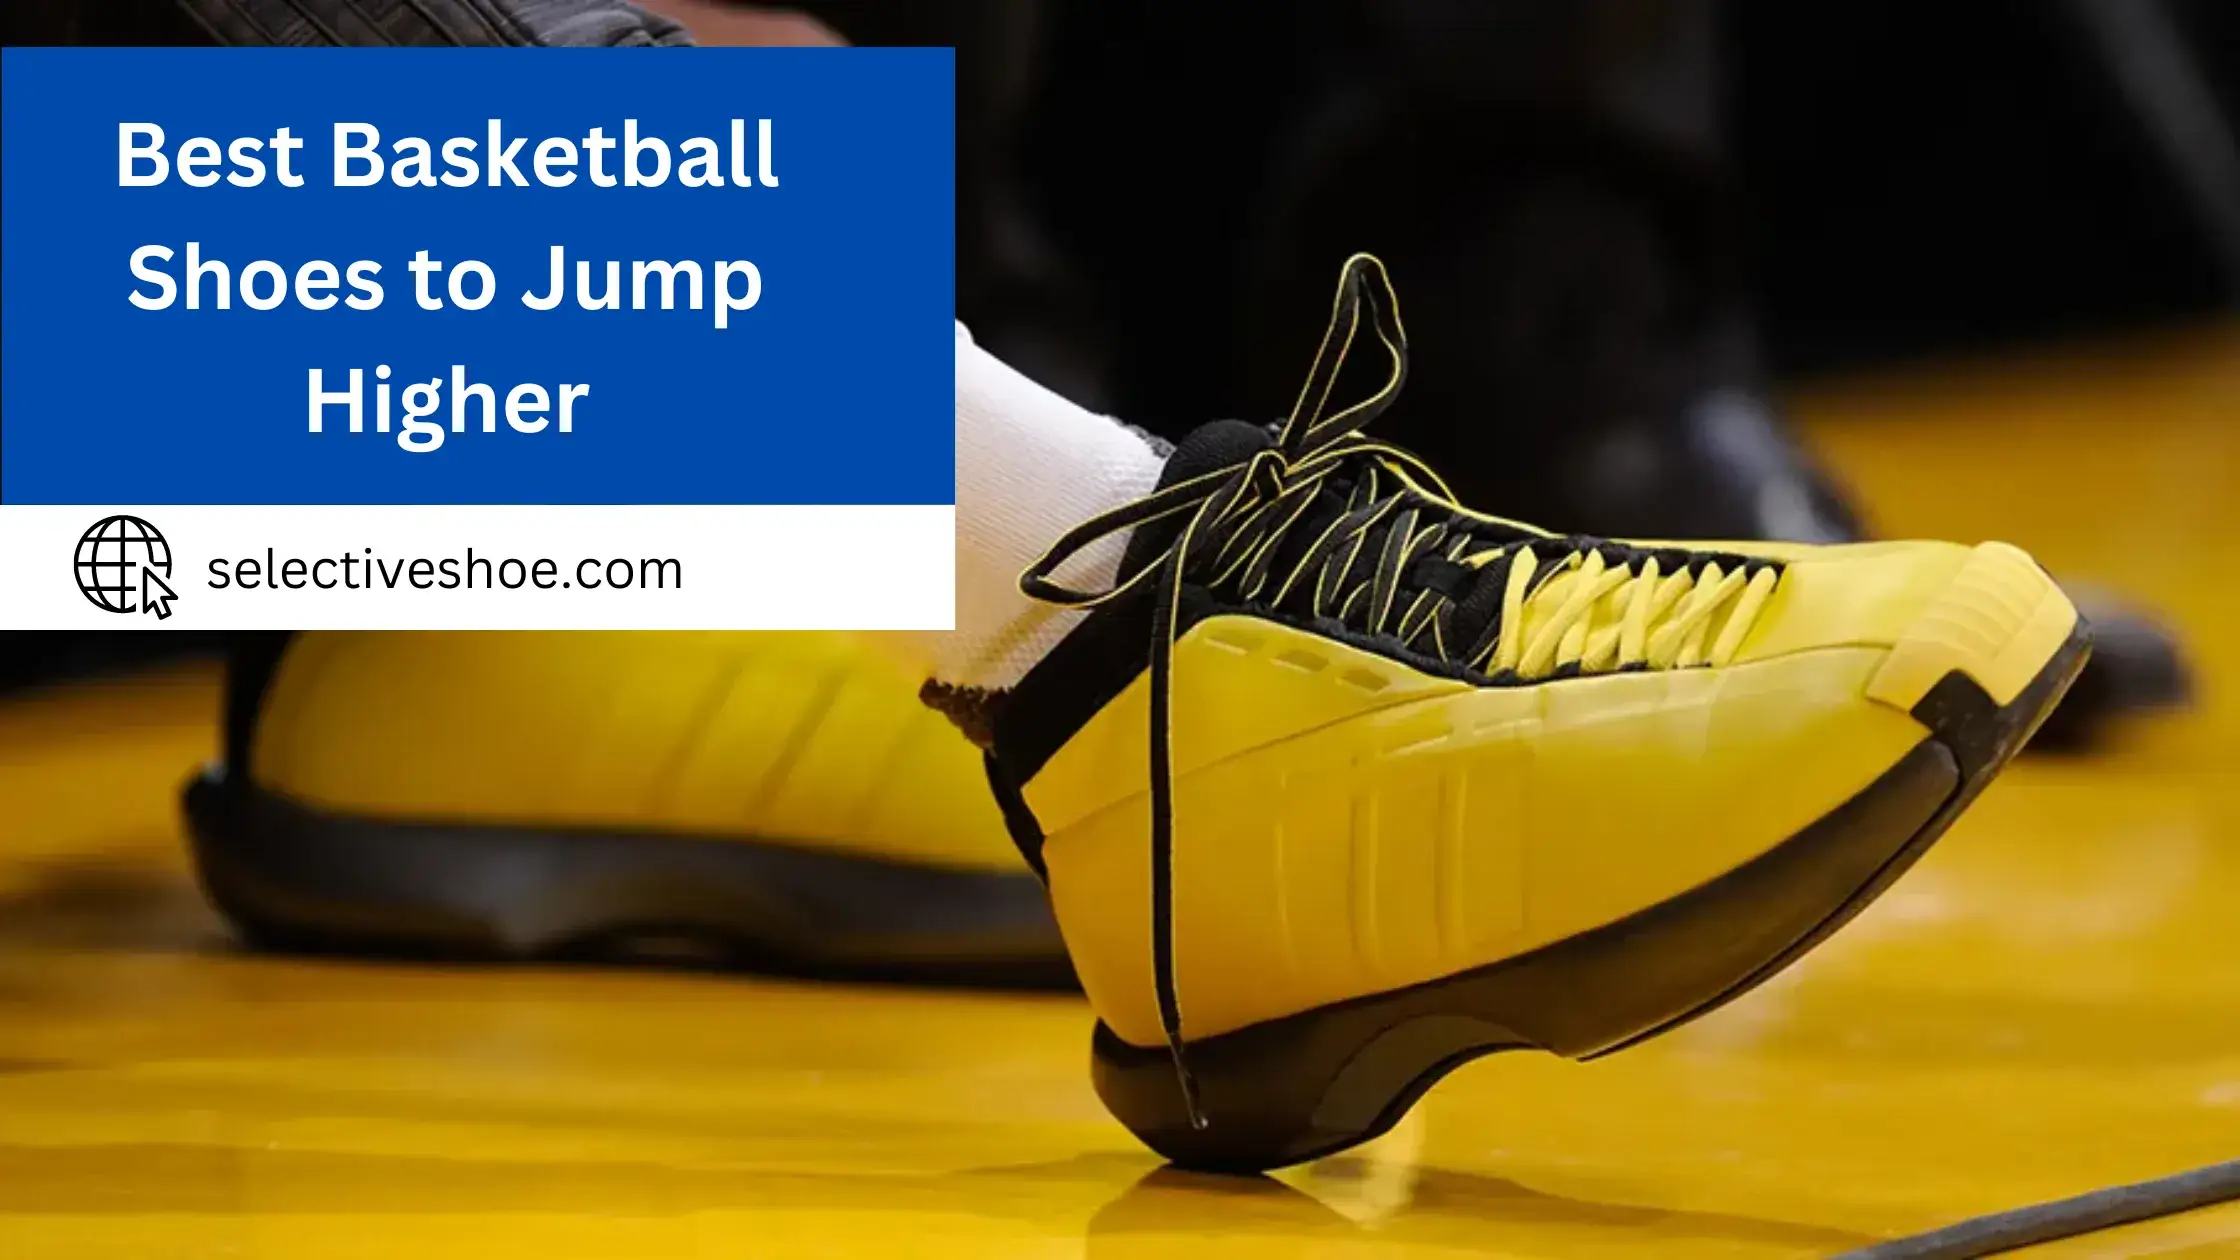 Best Basketball Shoes to Jump Higher - A Comprehensive Guide